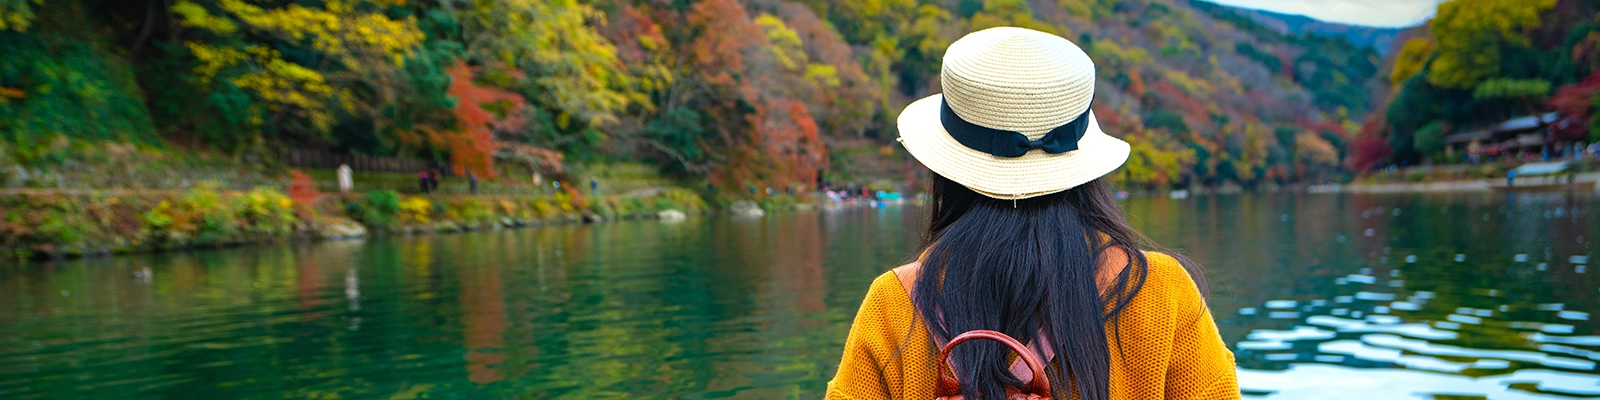 Boat ride on the Hozu River in Kyoto, Japan - a scenic waterway surrounded by lush forests and mountains.